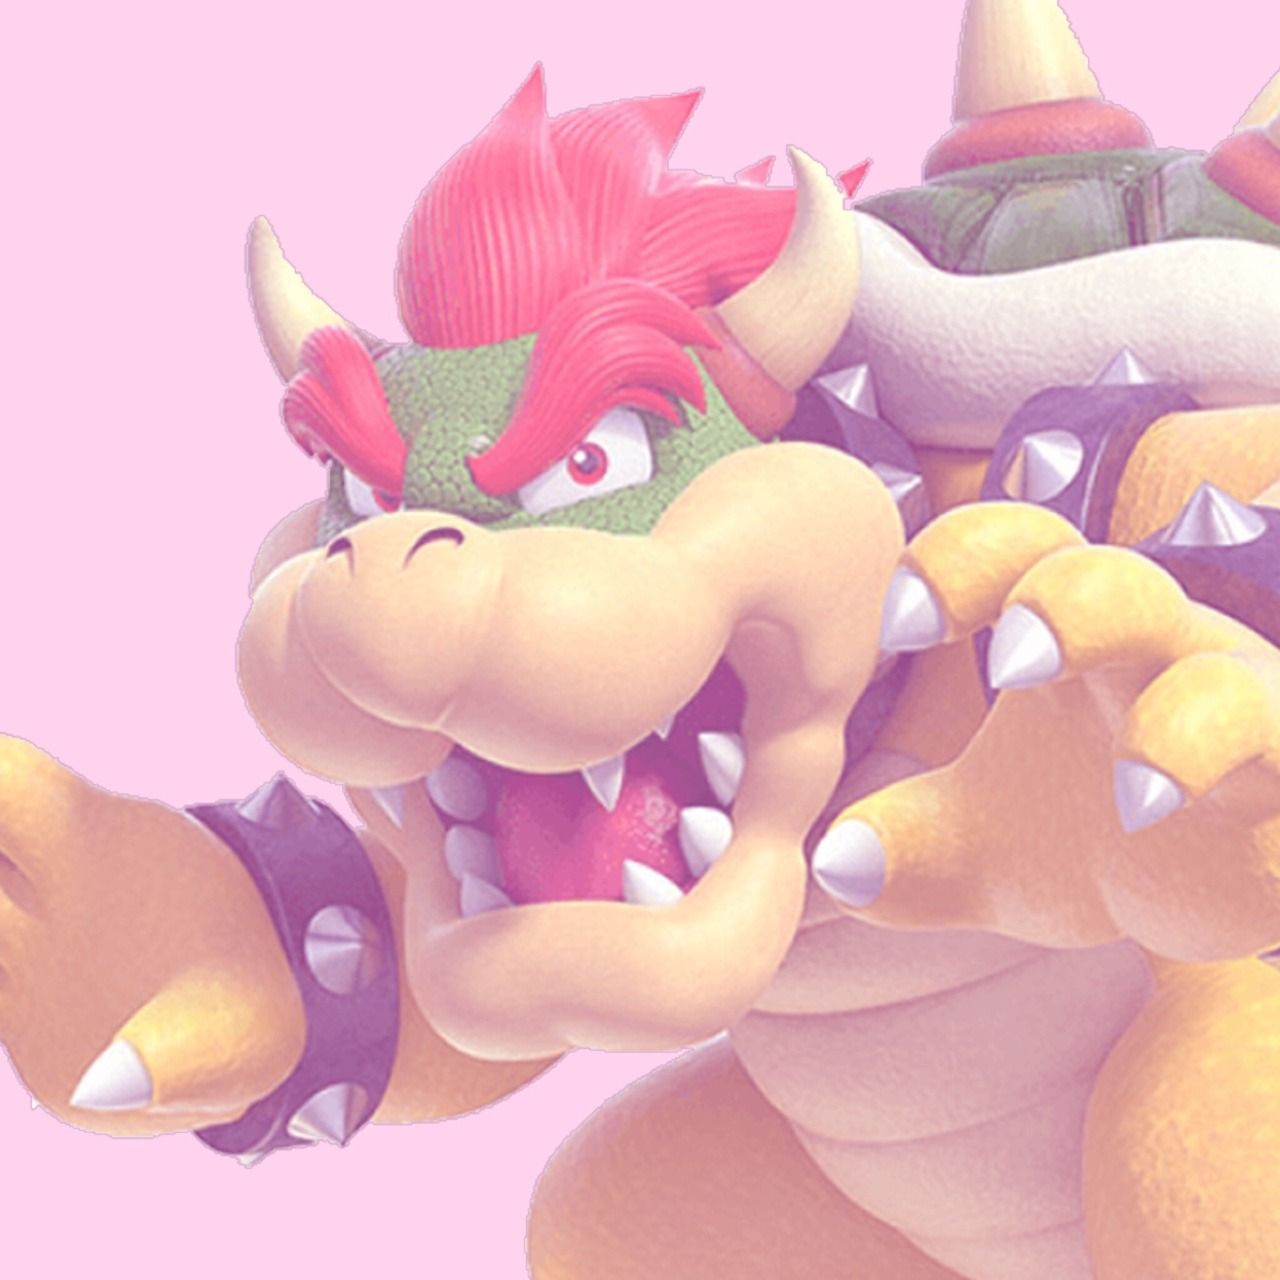 A picture of Bowser from Mario games. - Bowser